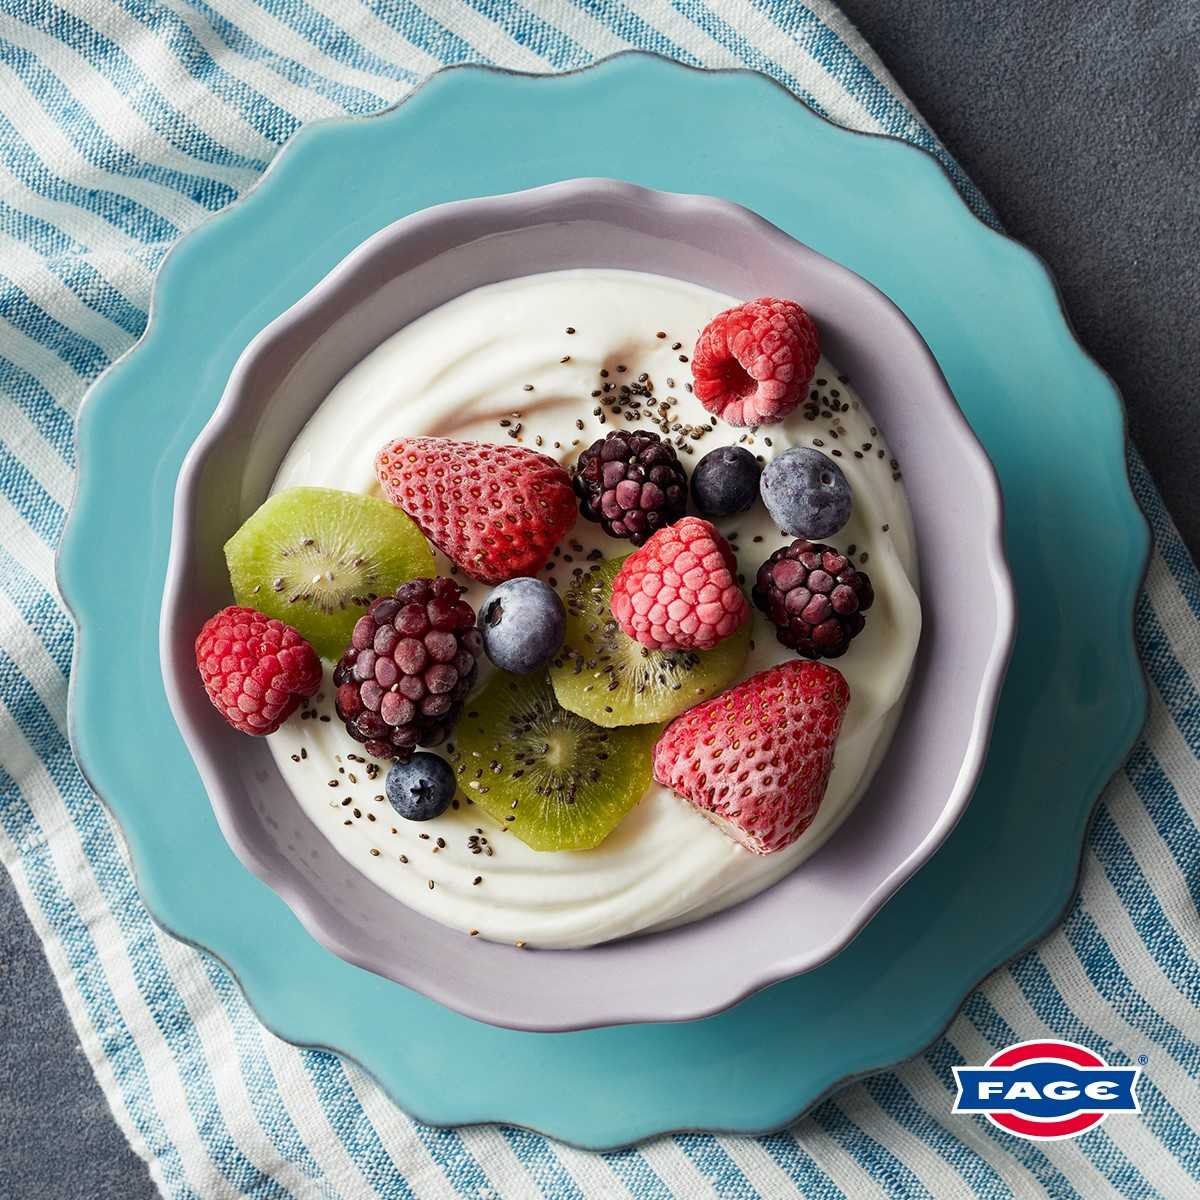 Nutrition Benefits of FAGE Total Yoghurt